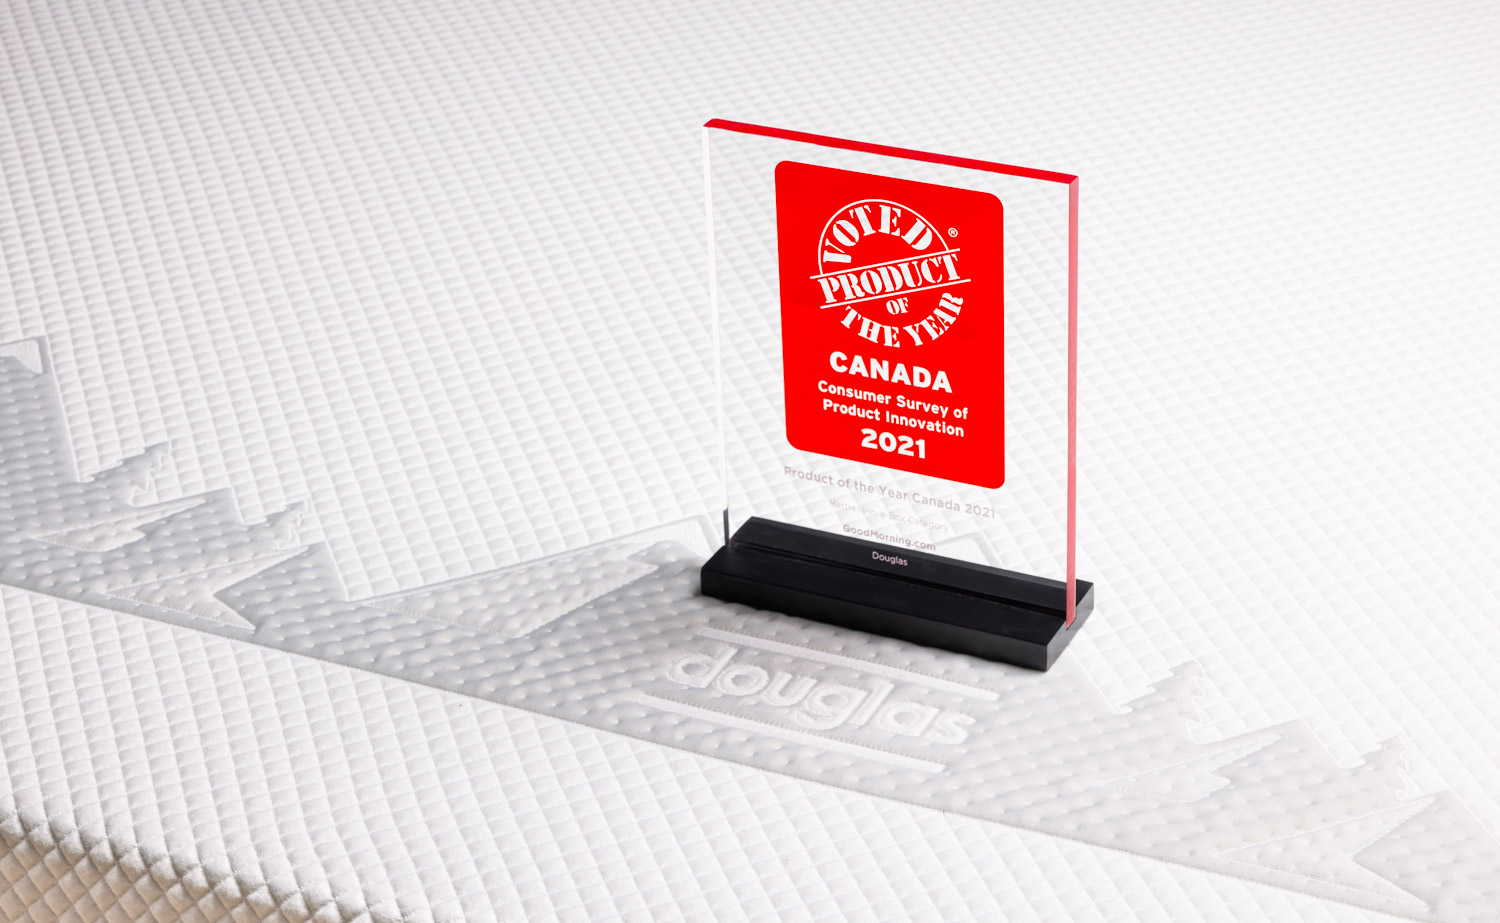 Product of the Year award on a Douglas mattress